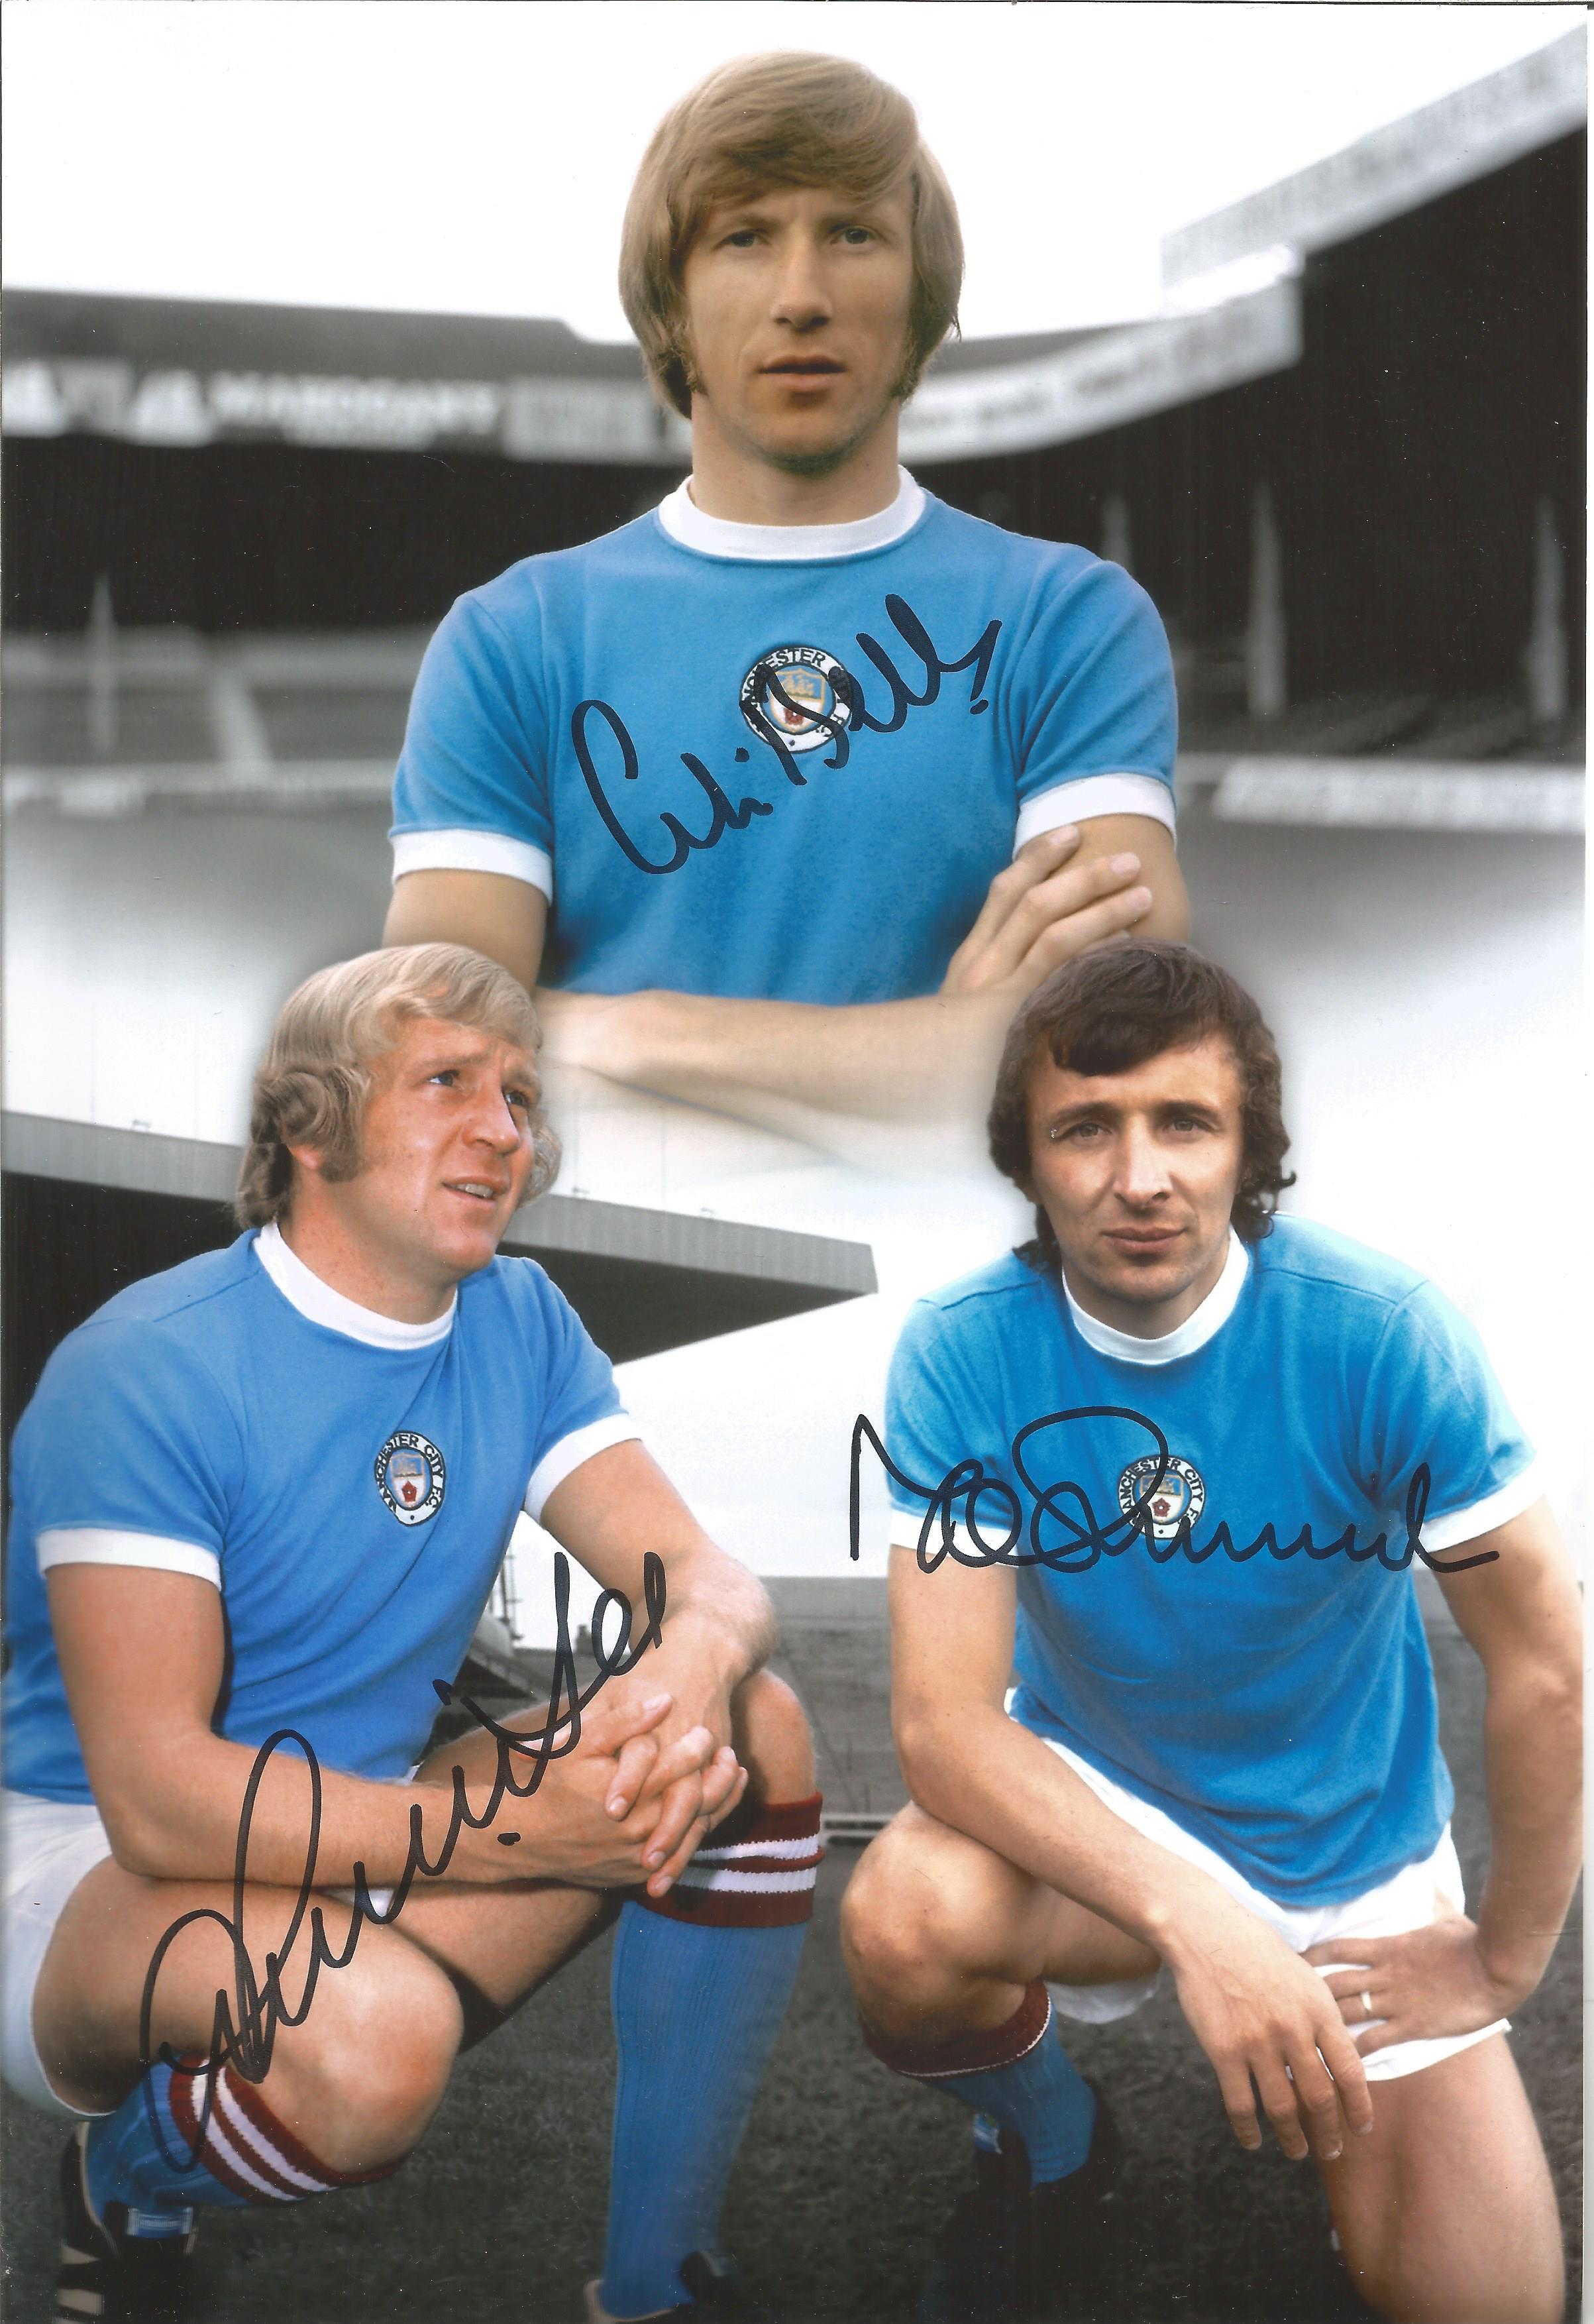 MAN CITY 1972, football autographed 12 x 8 photo, depicting a montage of images relating to